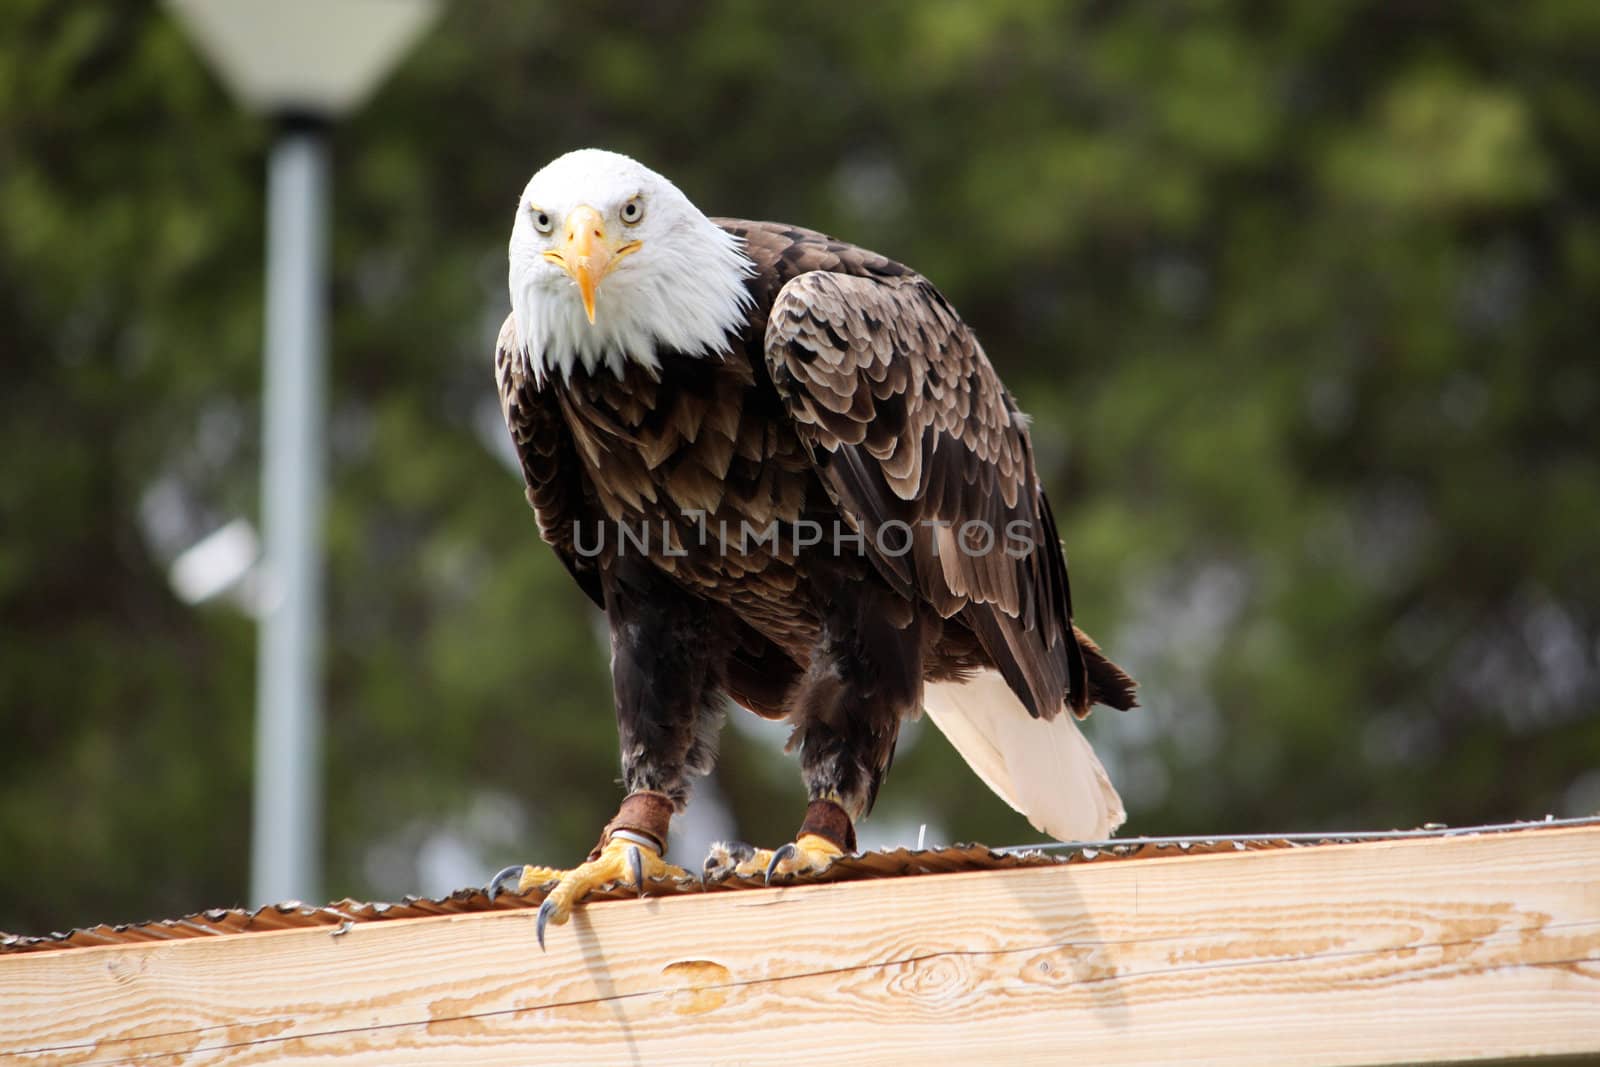 View of an American bald eagle bird of prey on top of a house.